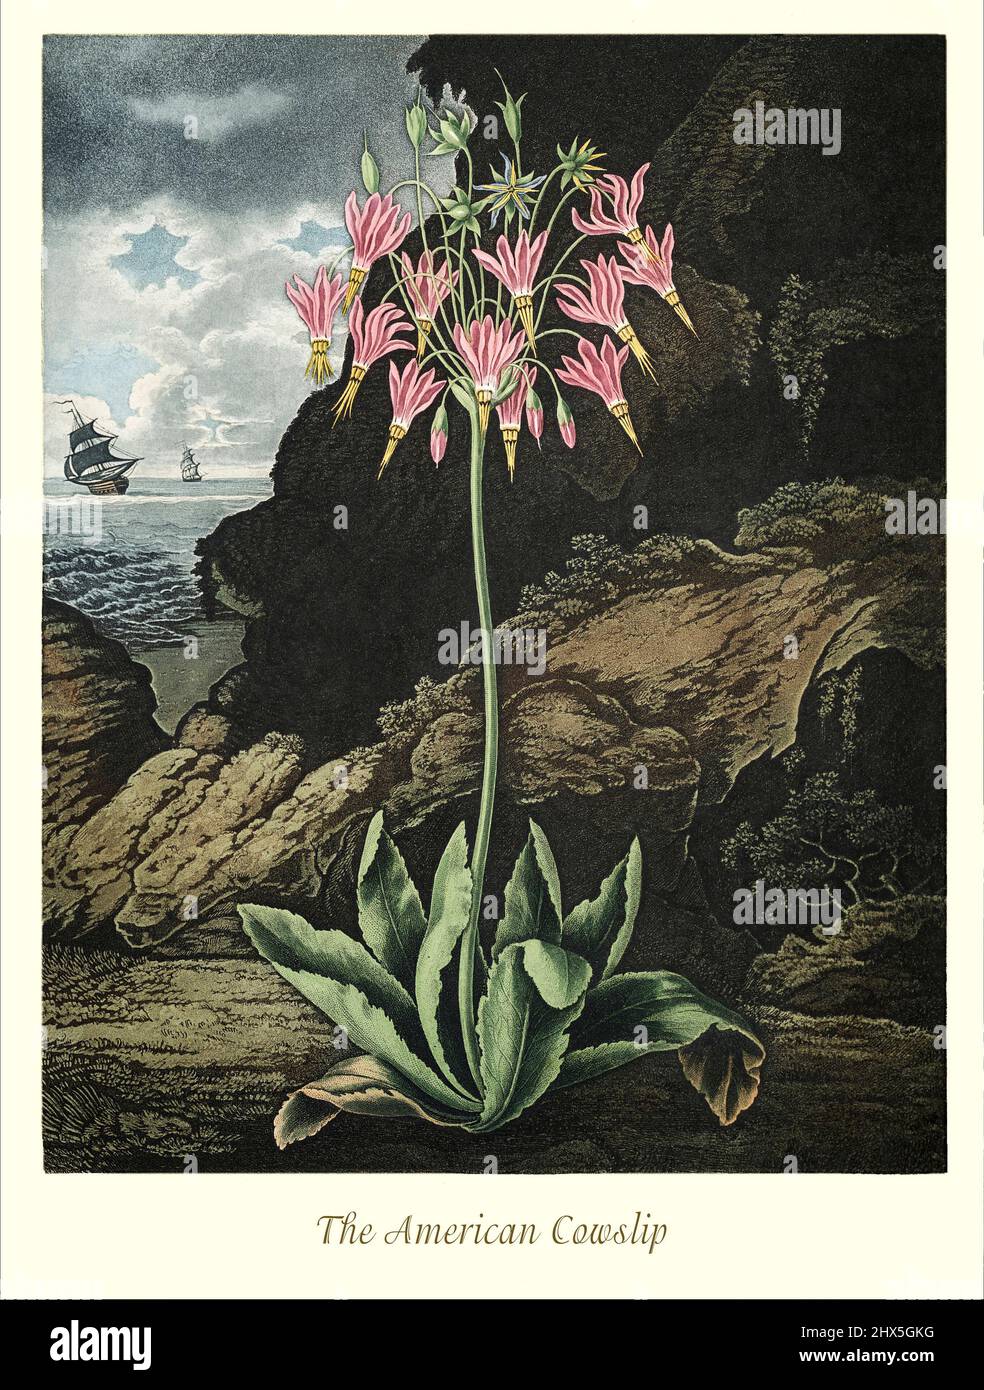 An early 19th century illustration of the American Cowslip, a Dodecatheon is related to the genus Primula (primroses and related plants). The species have basal clumps of leaves and nodding flowers that are produced at the top of tall stems rising from where the leaves join the crown. The genus is largely confined to North America and part of northeastern Siberia. This artwork for Robert John Thornton's 'The Temple of Flora' in 1807, was printed, for the publisher, by T. Bensley, London, England. Stock Photo